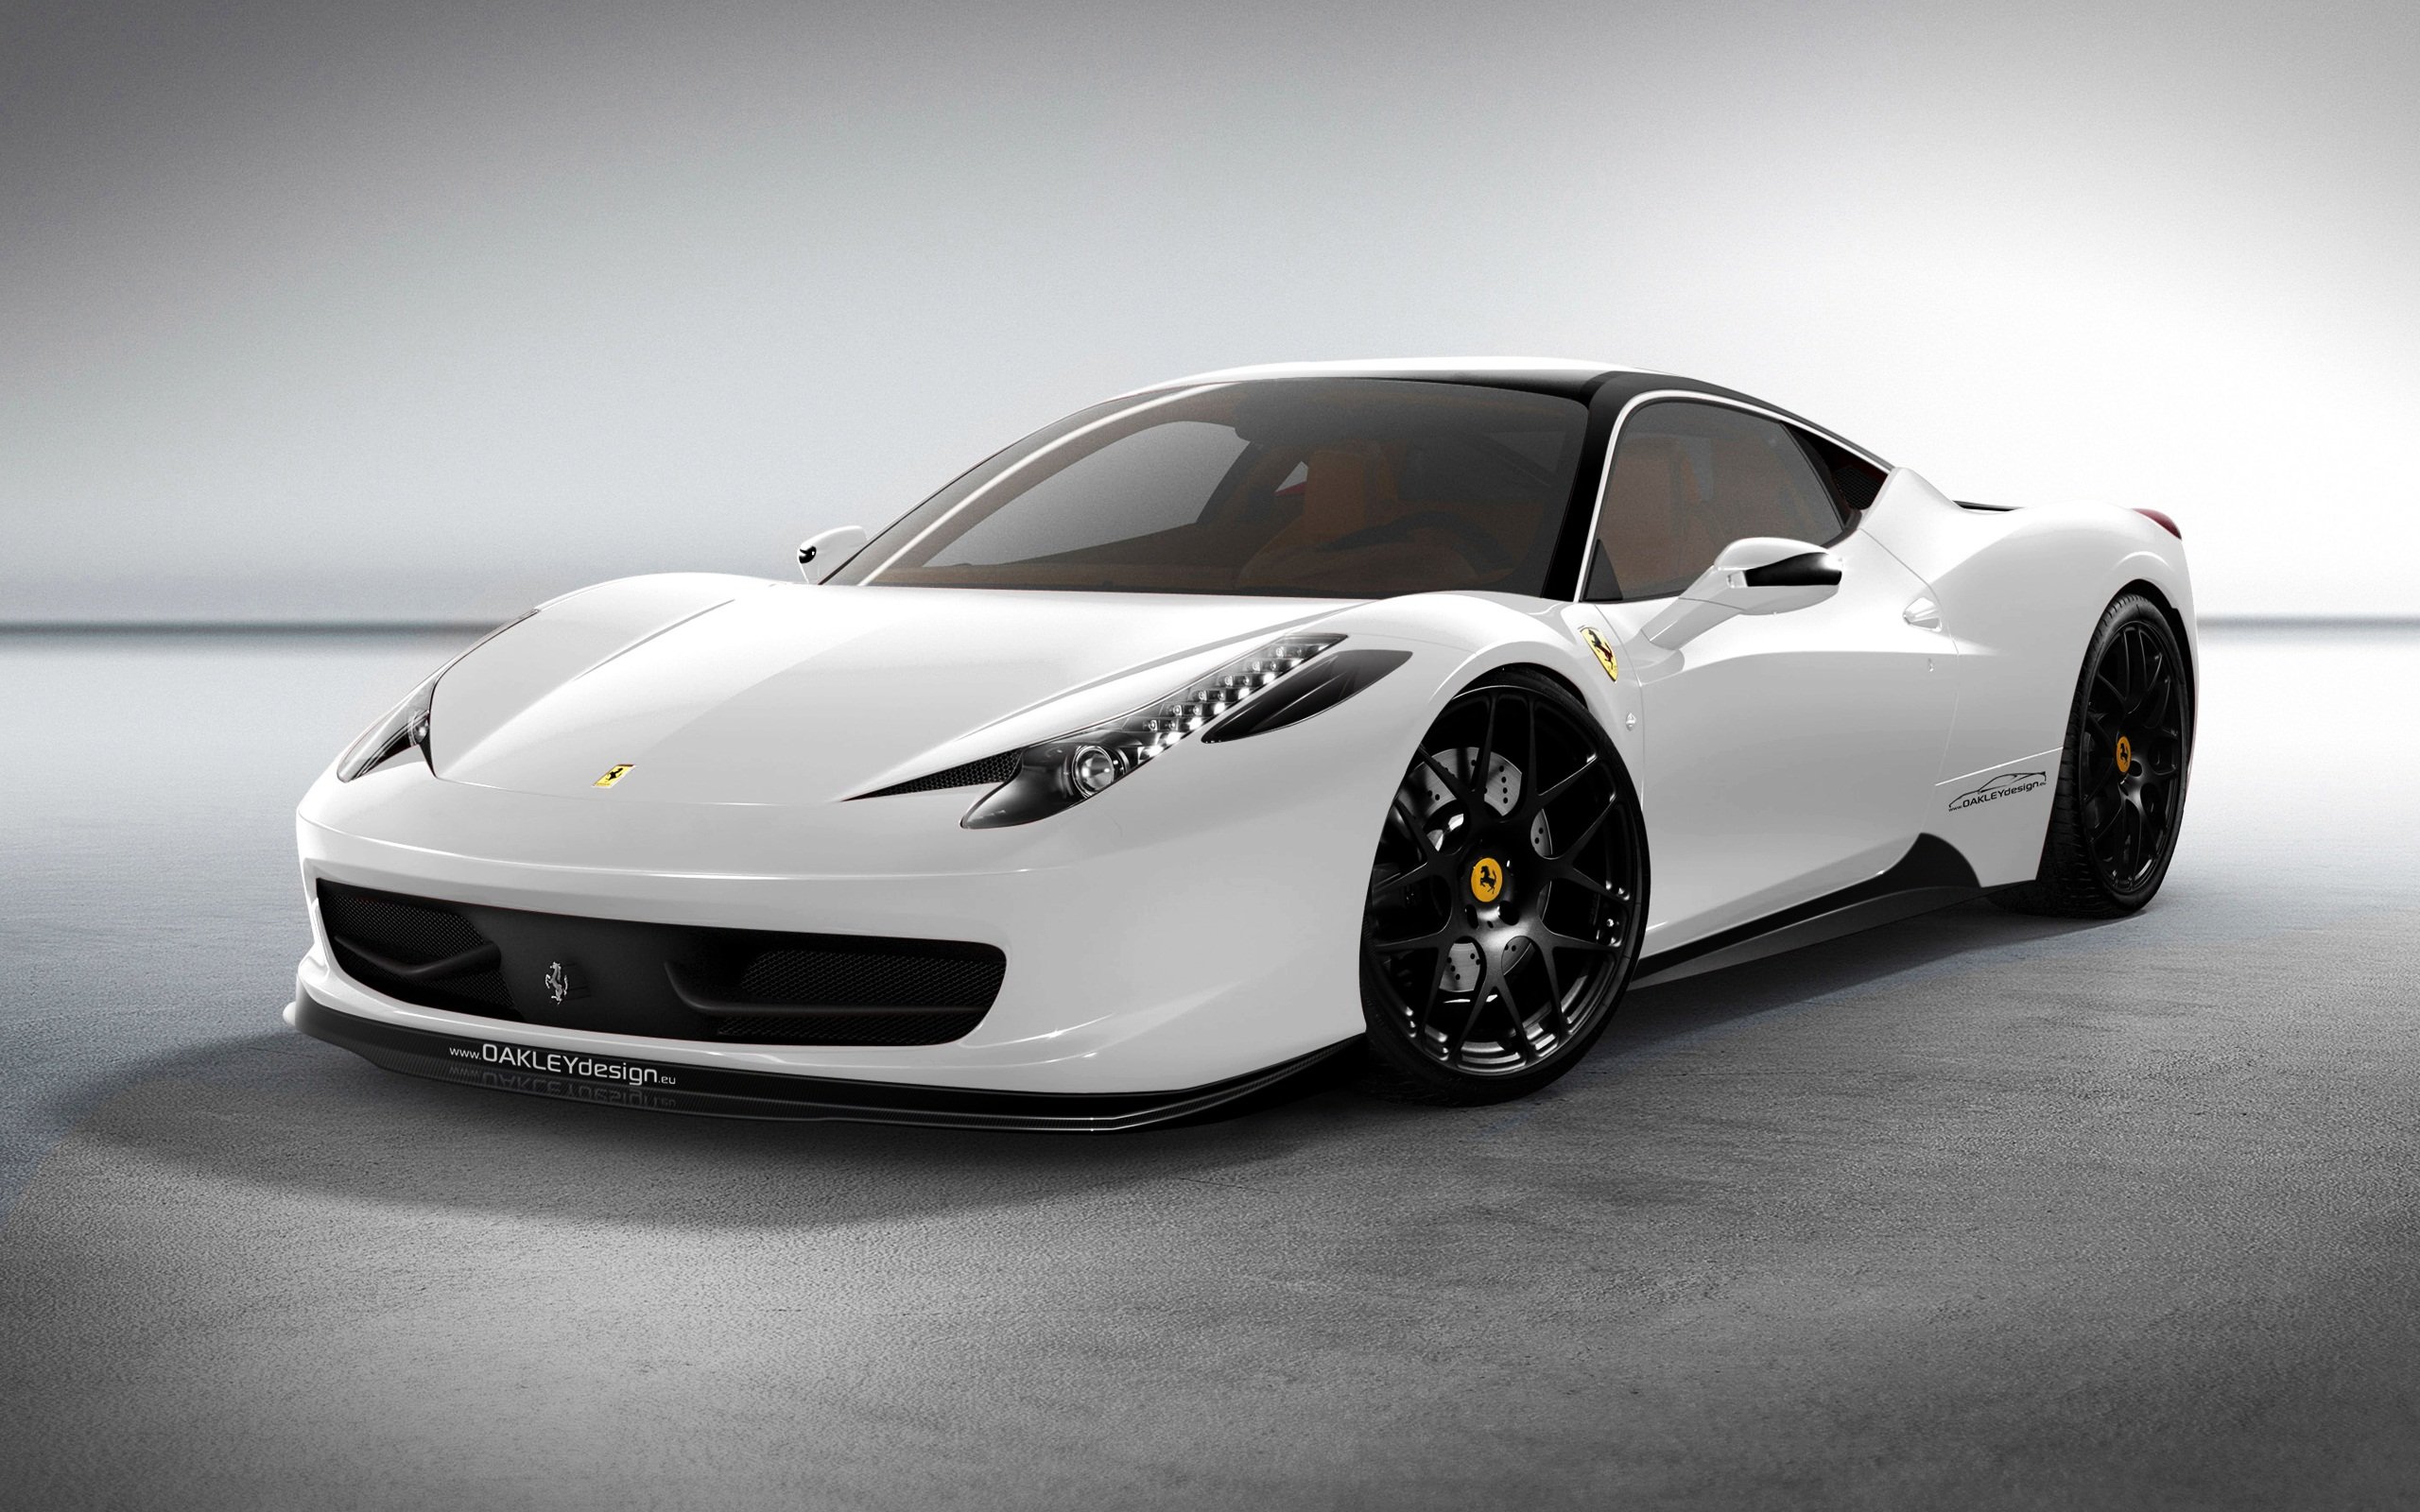 Coolest Collection of Ferrari Wallpaper Backgrounds In HD 2560x1600